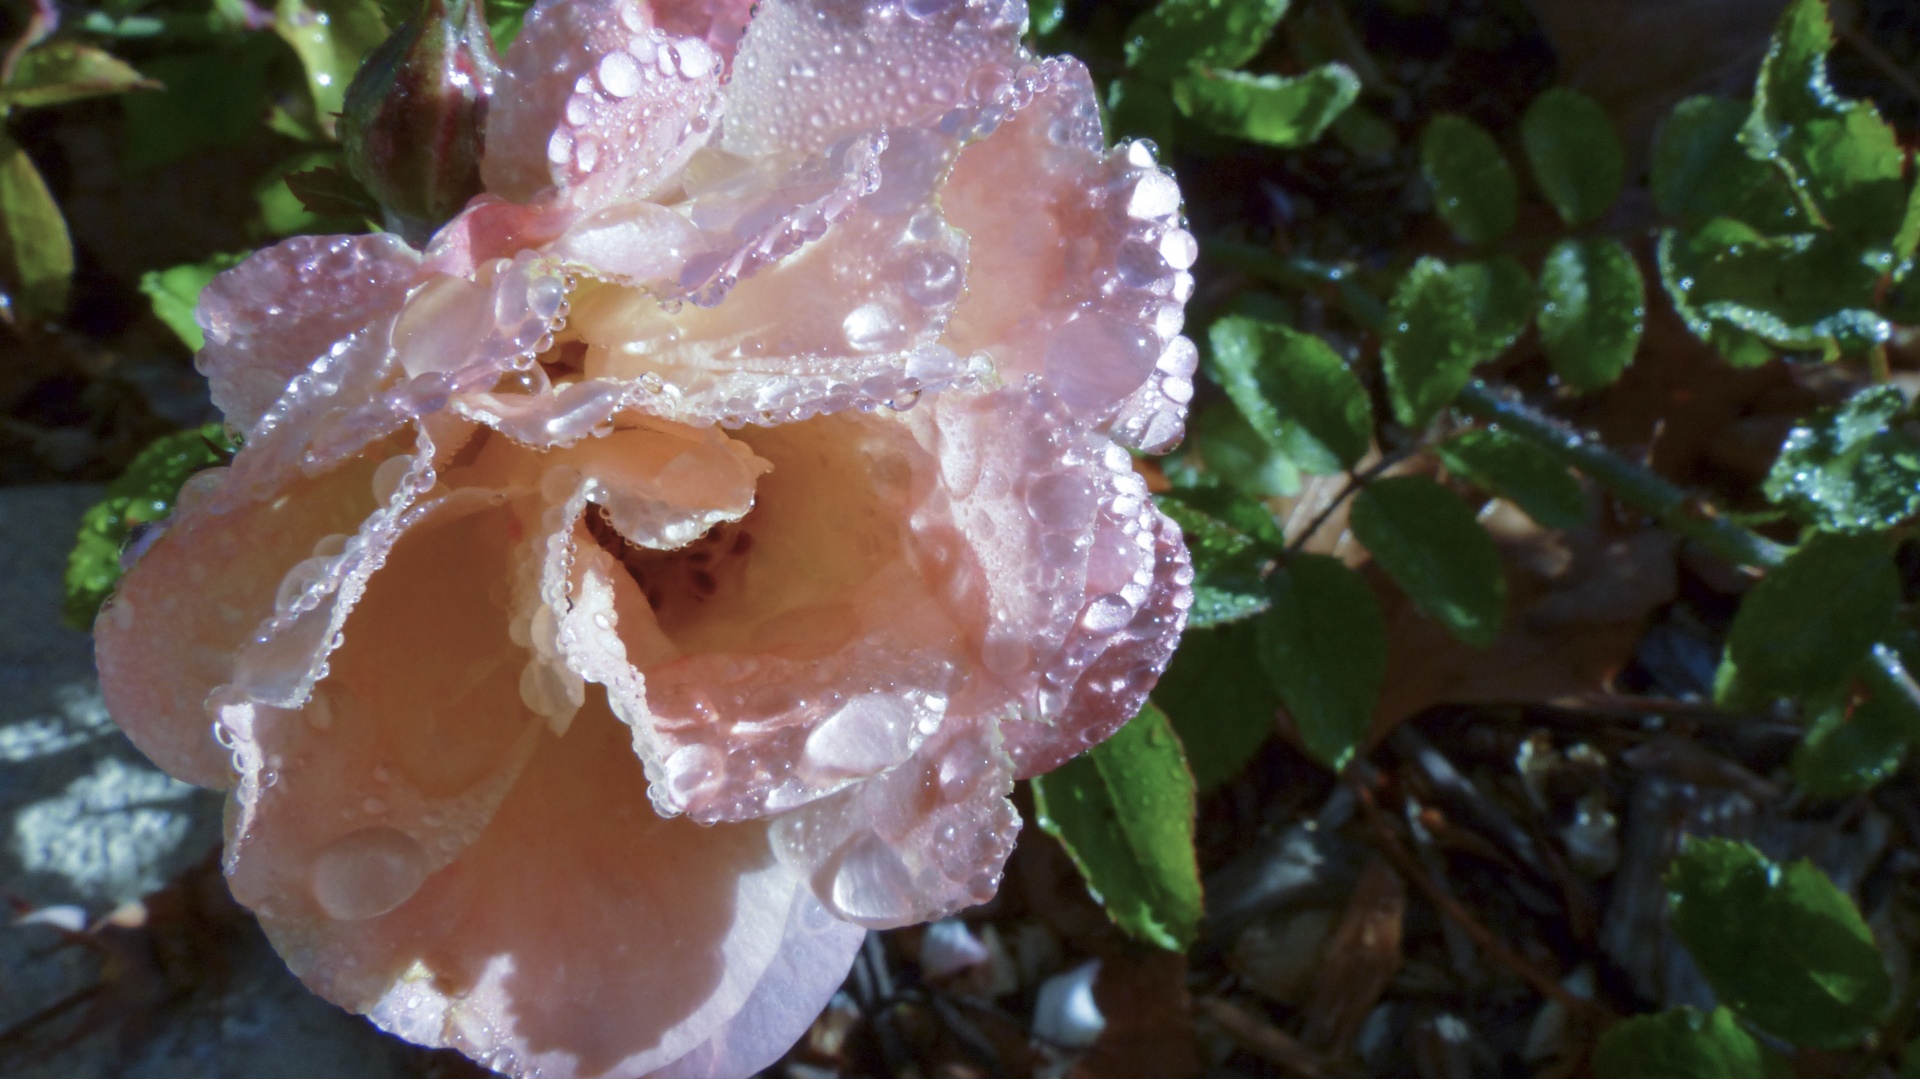 rose flower droplets free photo